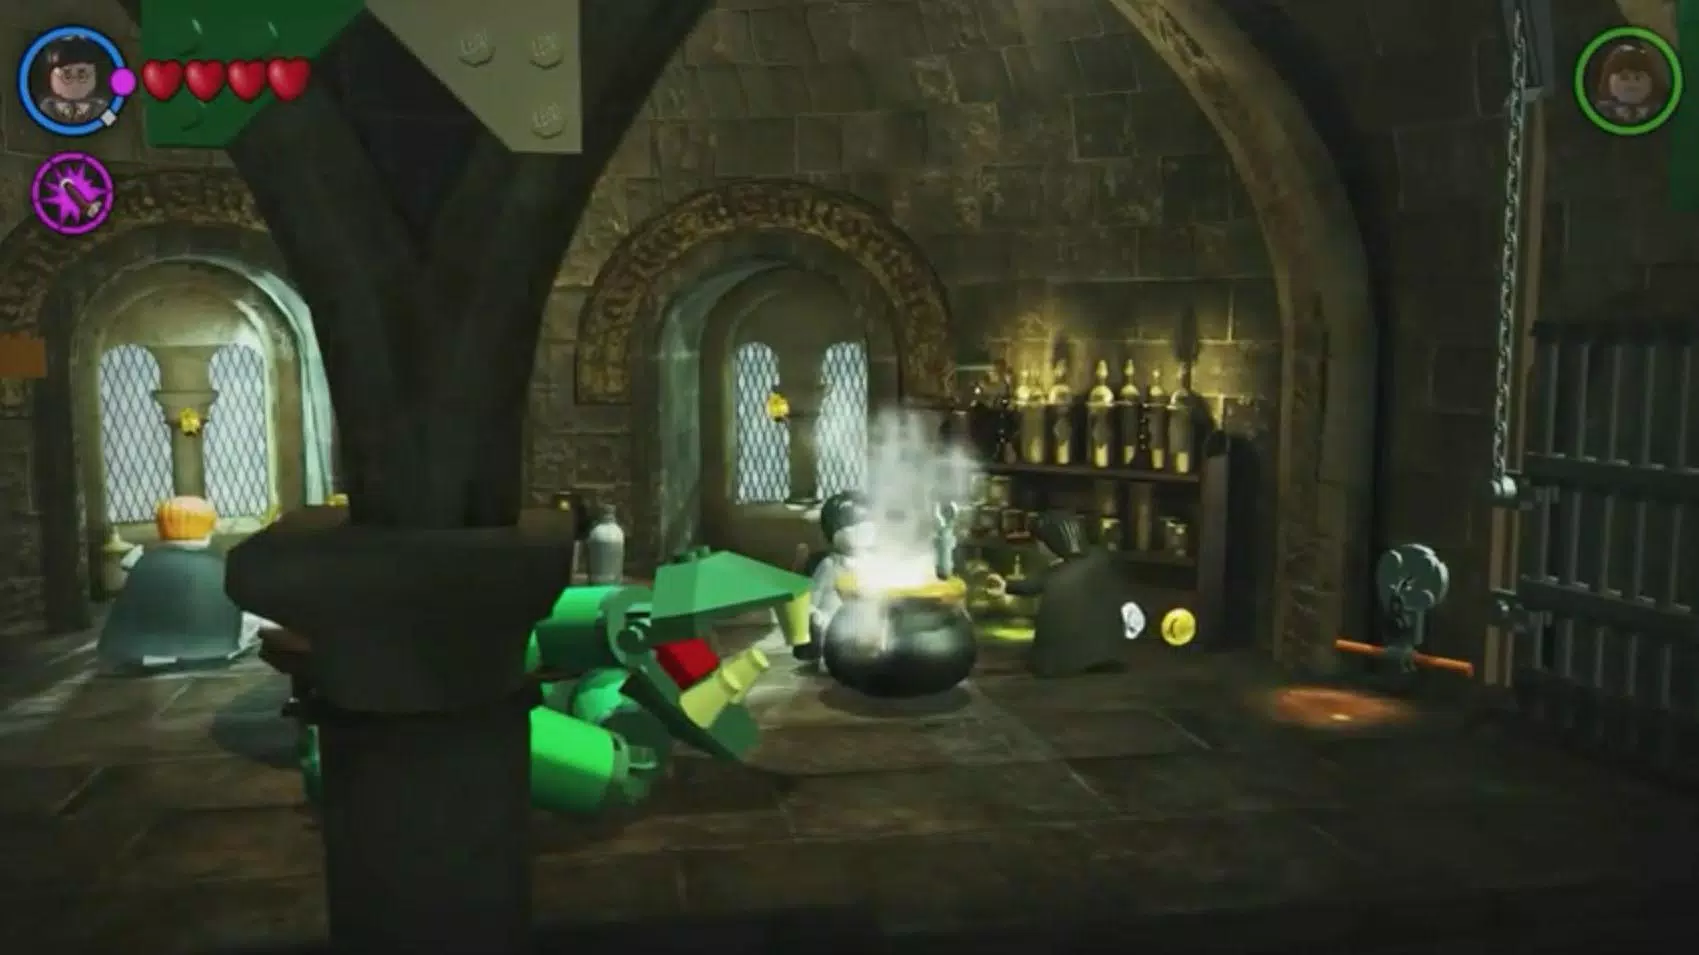 JEGUIDE LEGO Harry Potter for Android - APK Download